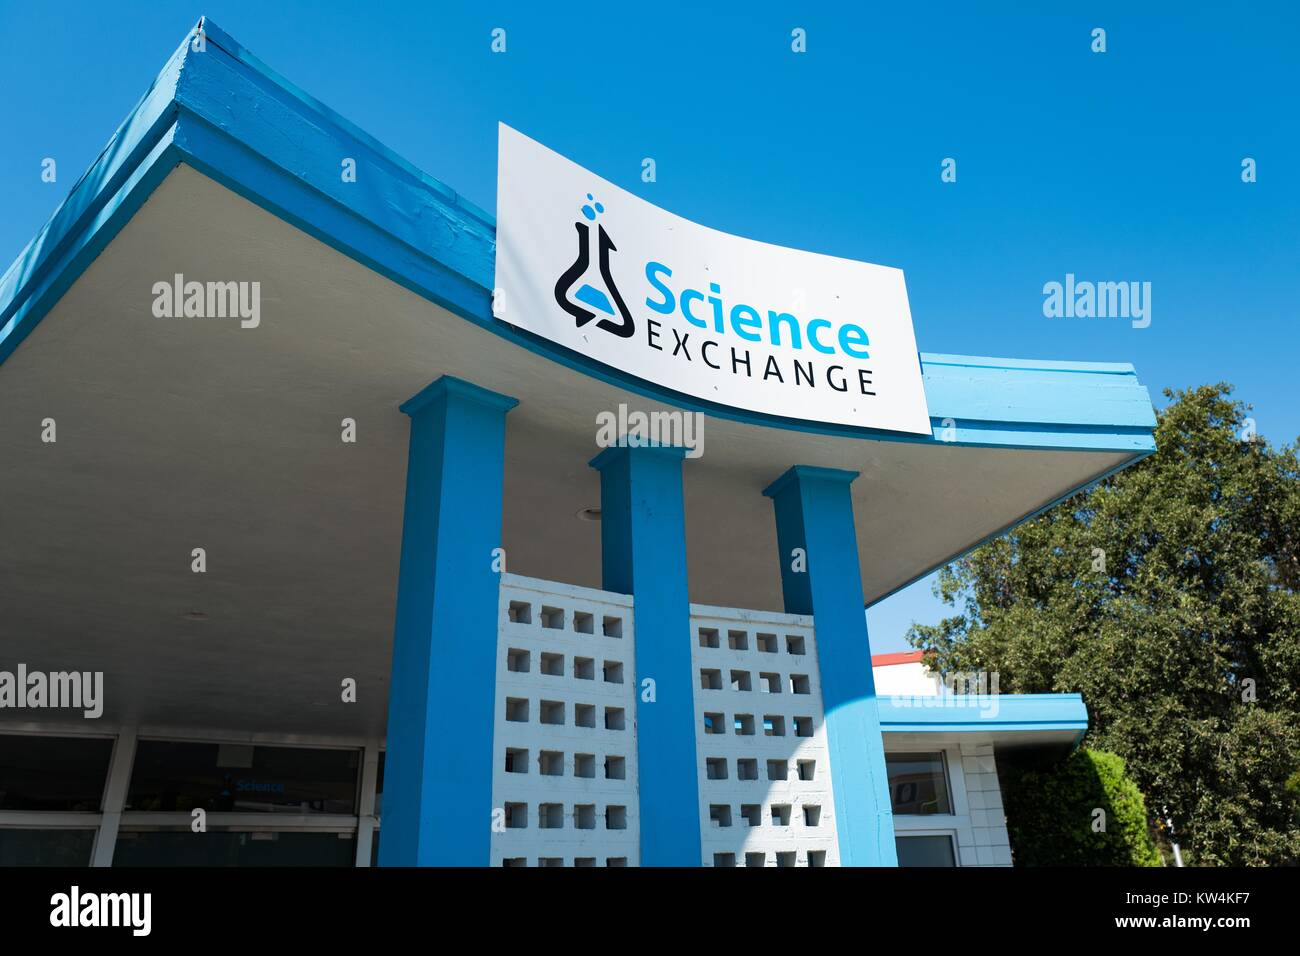 Logo and signage at headquarters of Science Exchange, a startup which allows researchers to outsource scientific experiments, in the Silicon Valley town of Palo Alto, California, August 25, 2016. Stock Photo